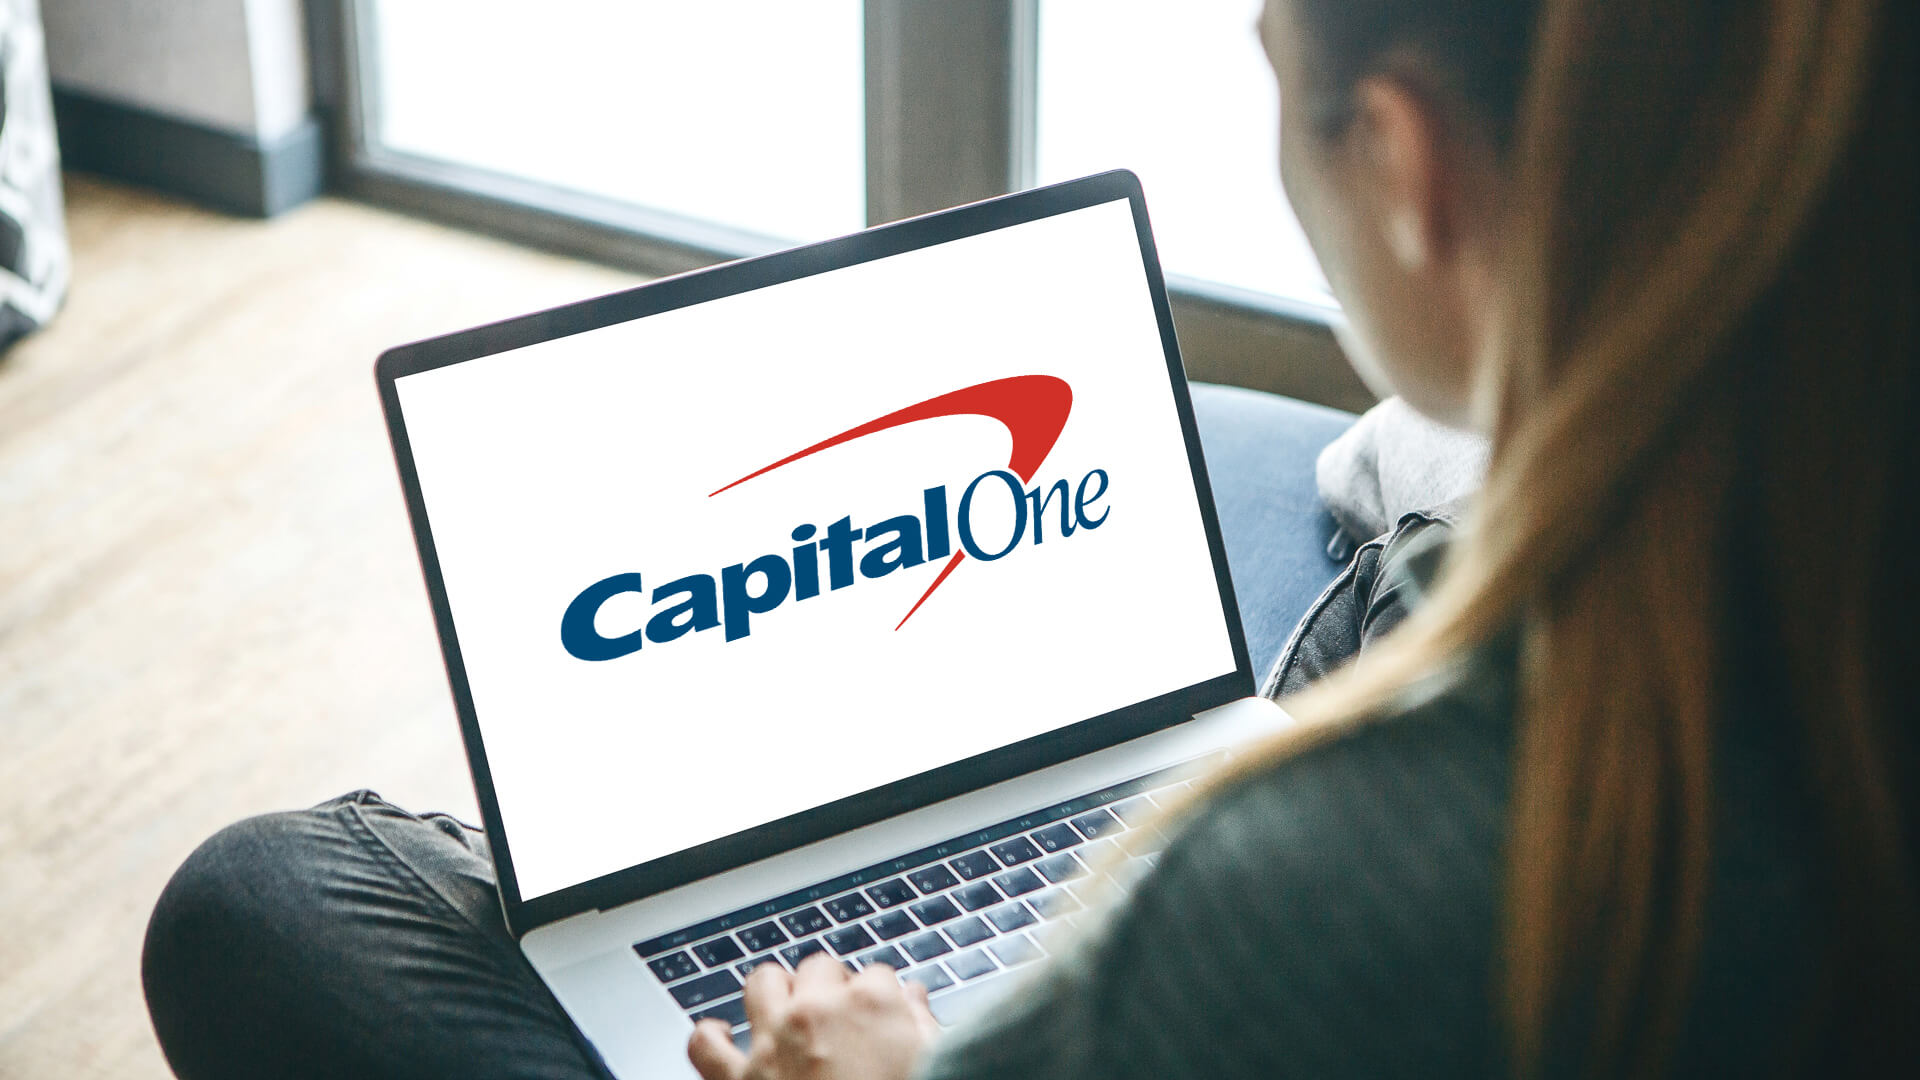 capitol one contact